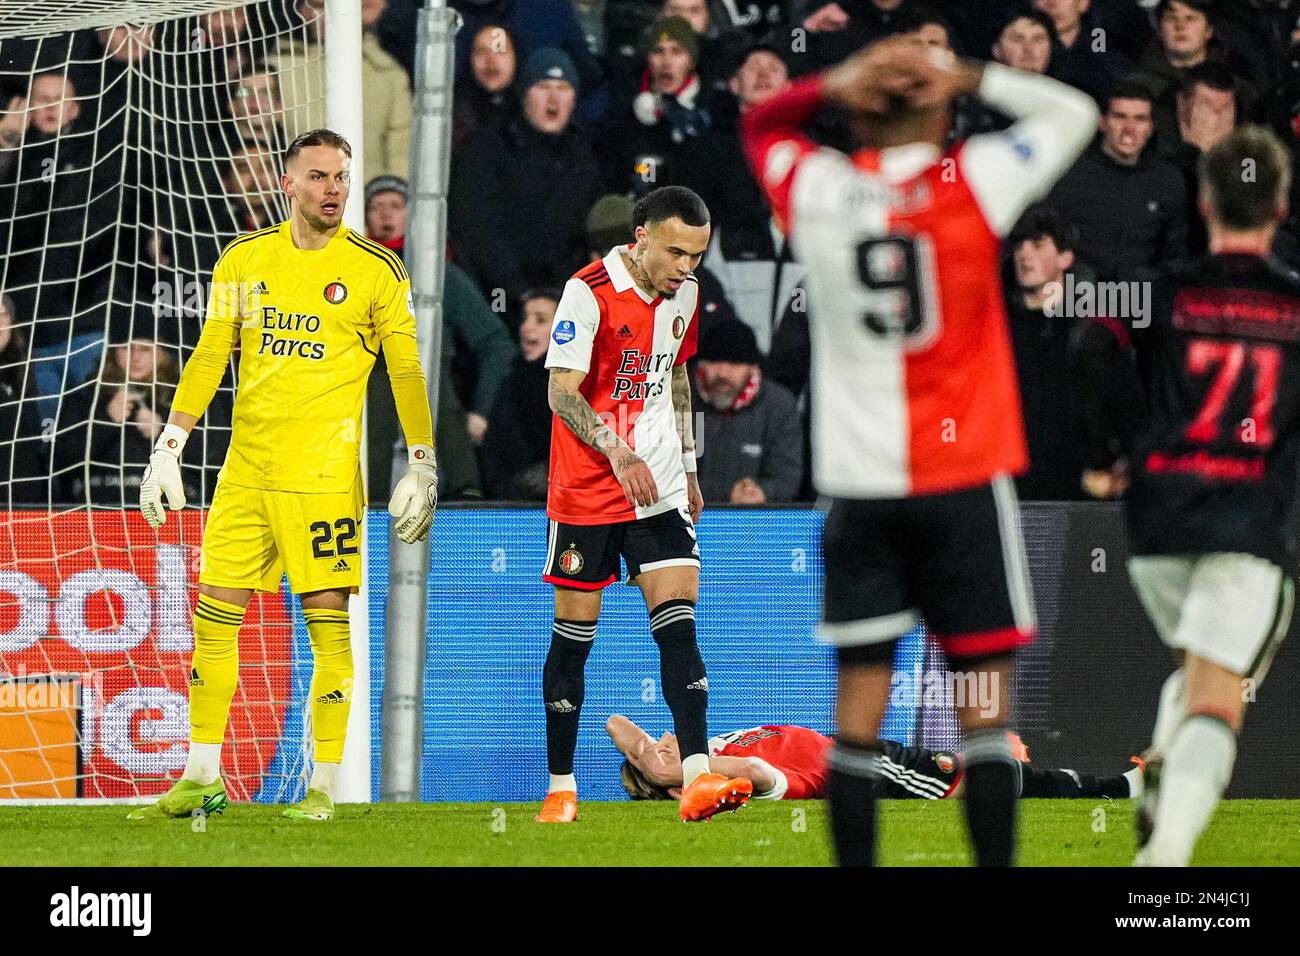 Rotterdam - Feyenoord keeper Timon Wellenreuther, Quilindschy Hartman of Feyenoord react to the 0-2 during the match between Feyenoord v NEC Nijmegen at Stadion Feijenoord De Kuip on 8 February 2023 in Rotterdam, Netherlands. (Box to Box Pictures/Tom Bode) Stock Photo